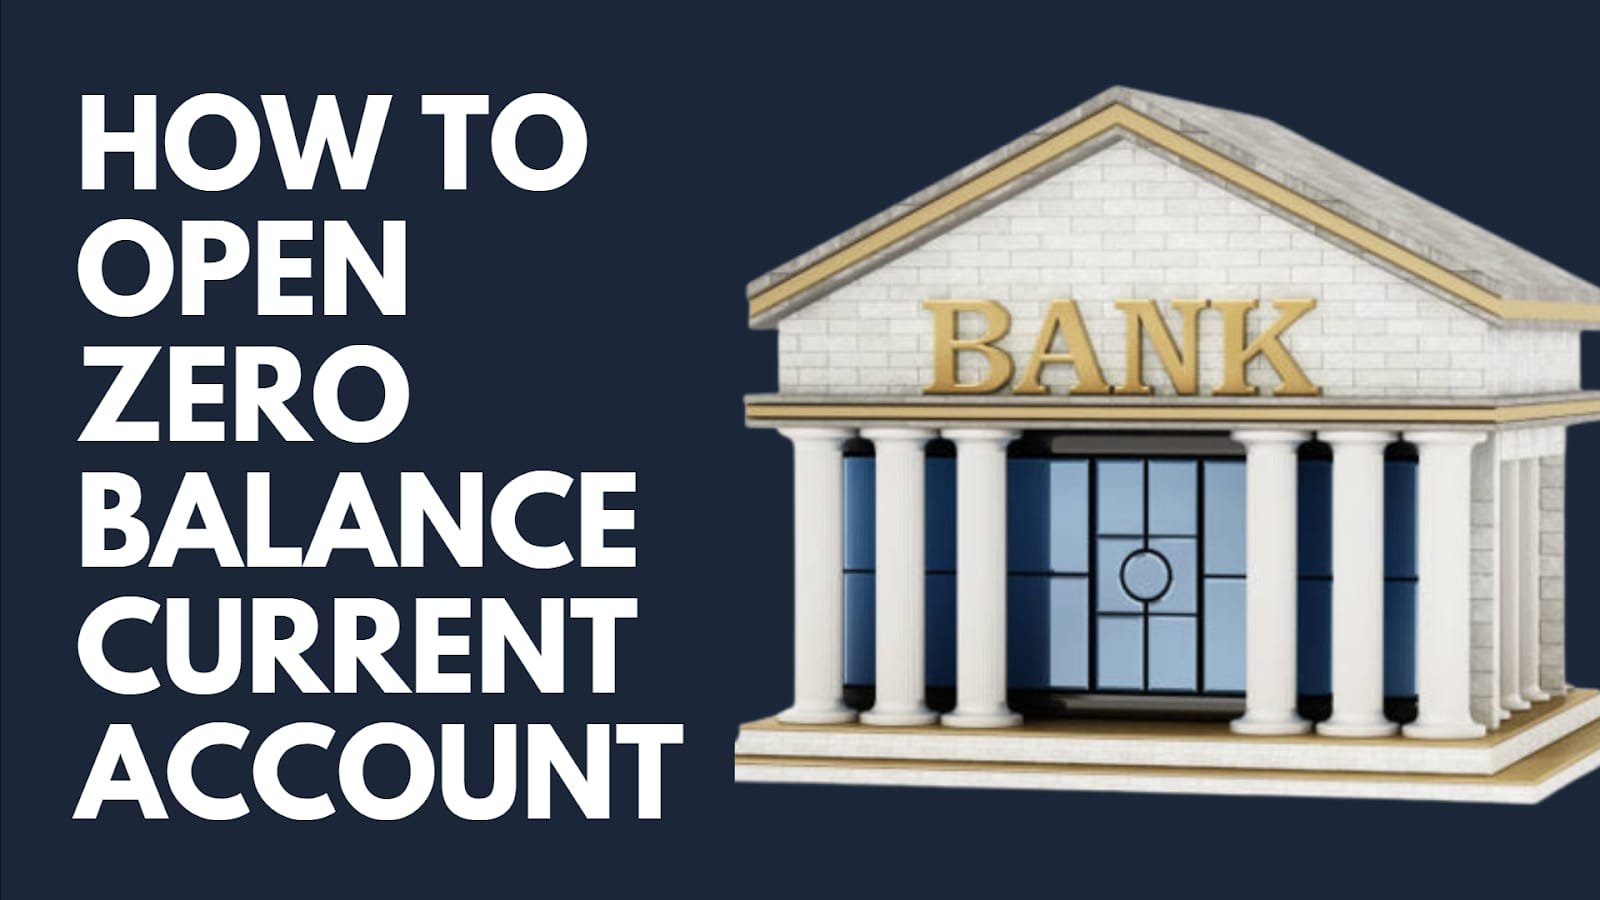 Zero Balance Current Account: Your Guide to Opening It Online